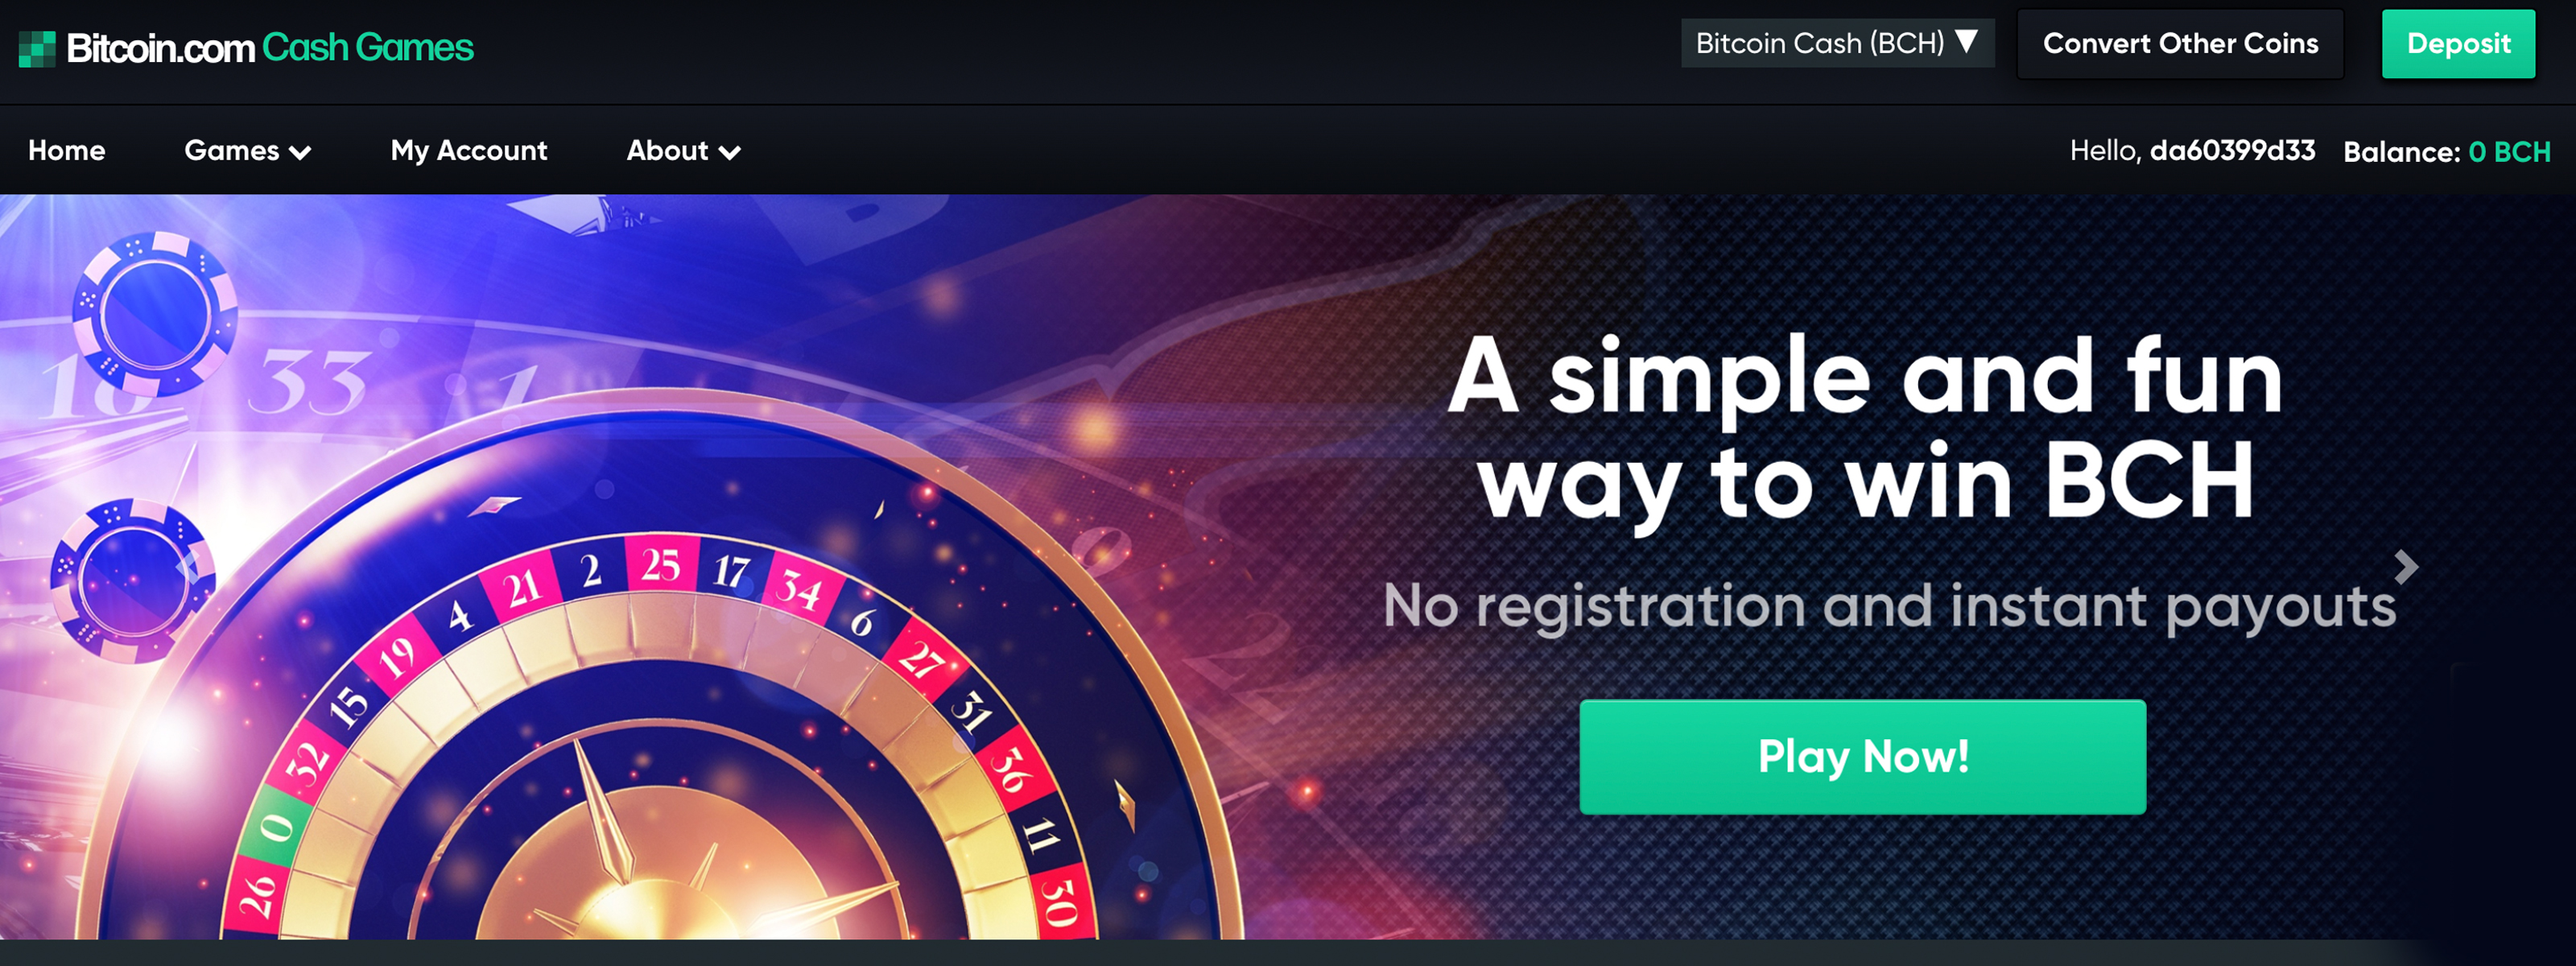 Why You Can't Bet With Bitcoin at Online Casinos in the US